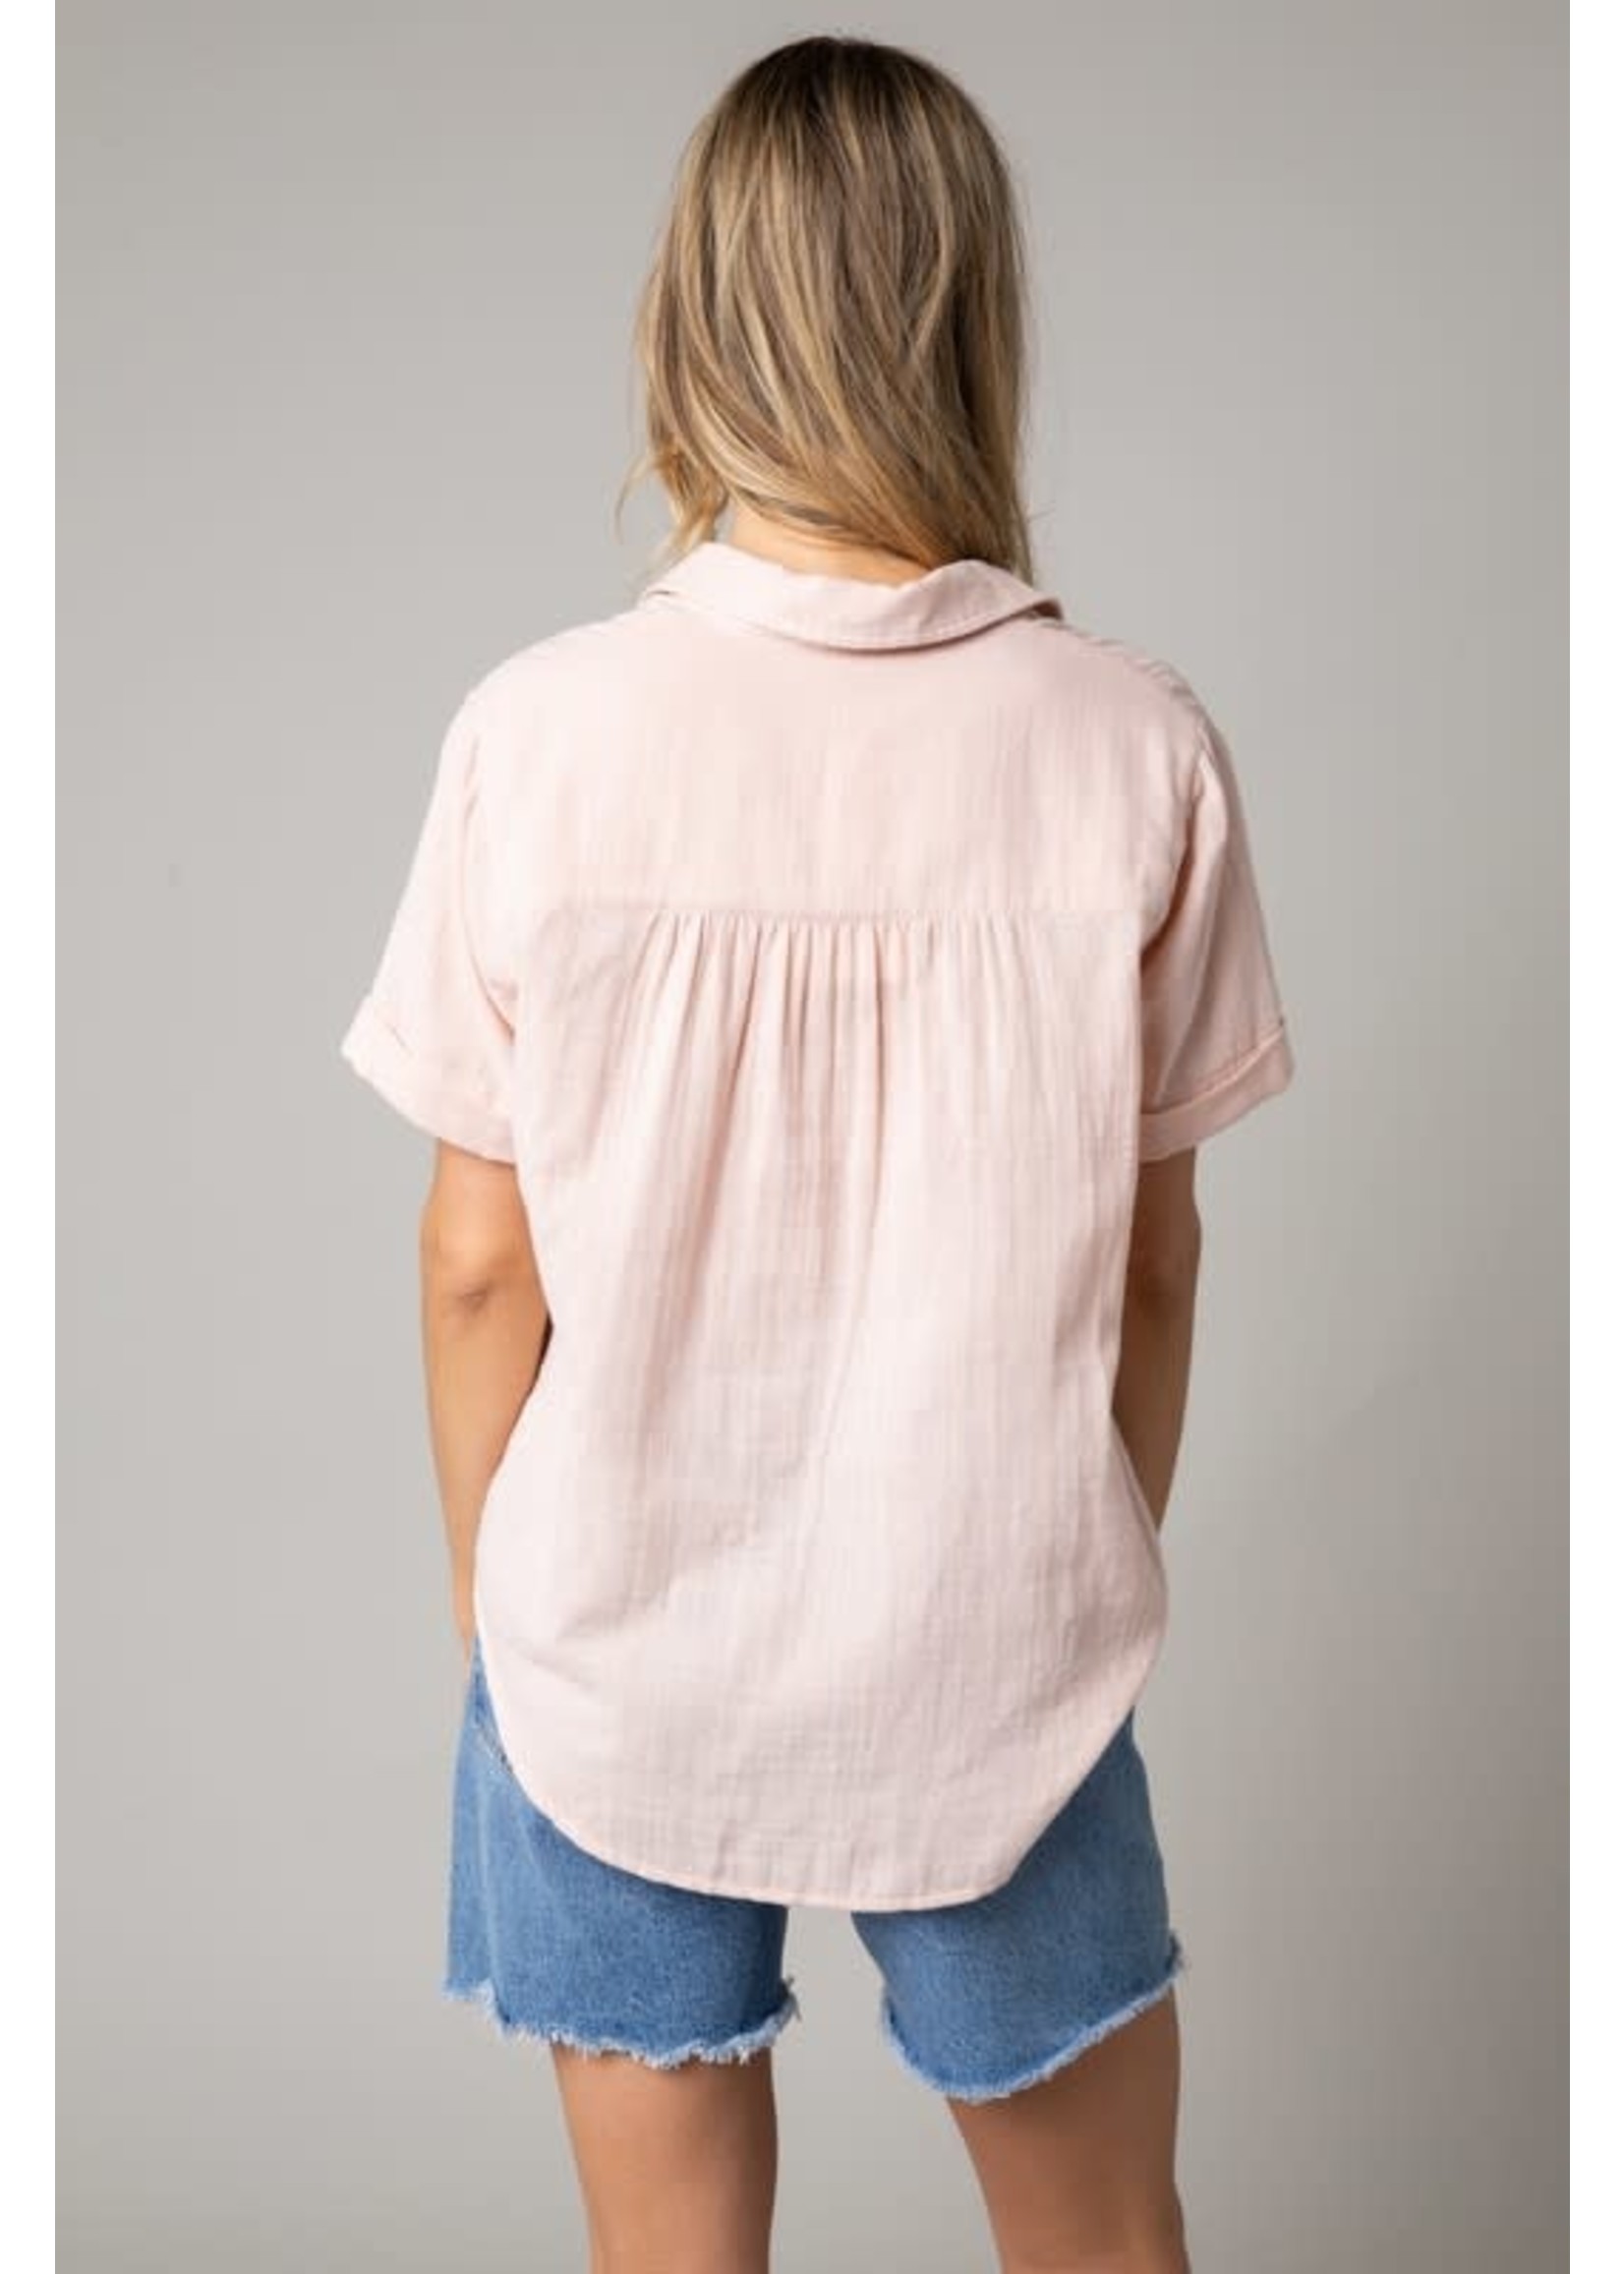 EM & ELLE Lucy Collared Top